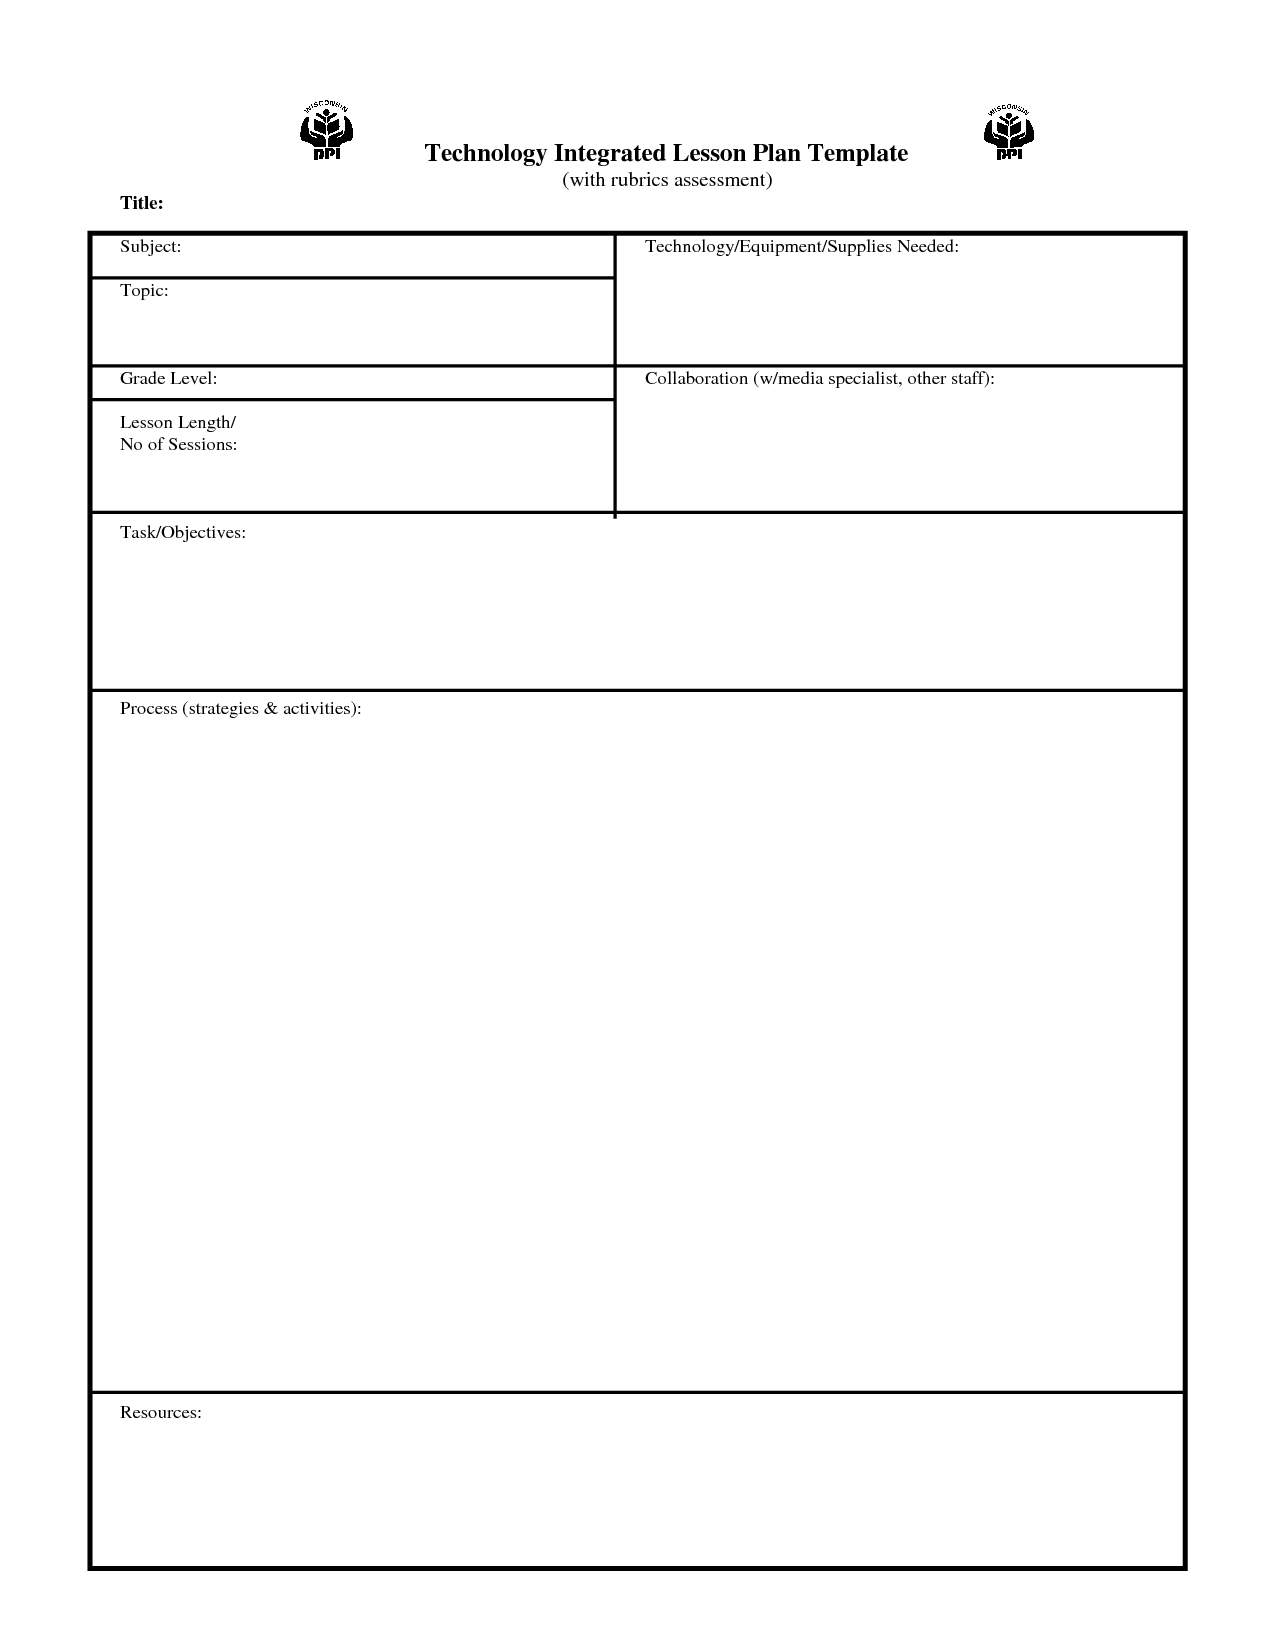 Blank Lesson Plan Template Pdf, Adapt It To Fit My Needs